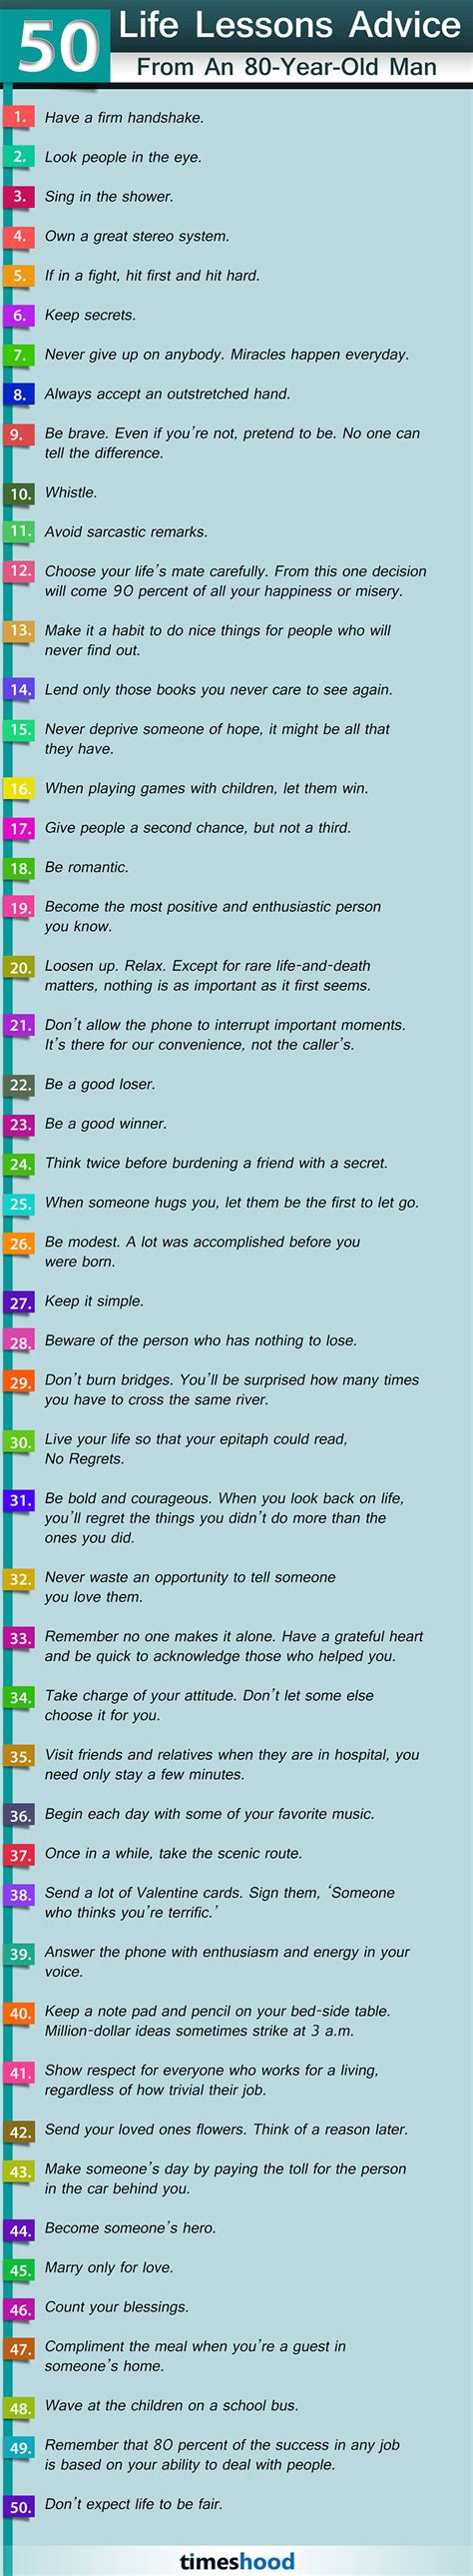 Learn 50 Best Life Advice From An 80 Year Old Man Infographic Picshood